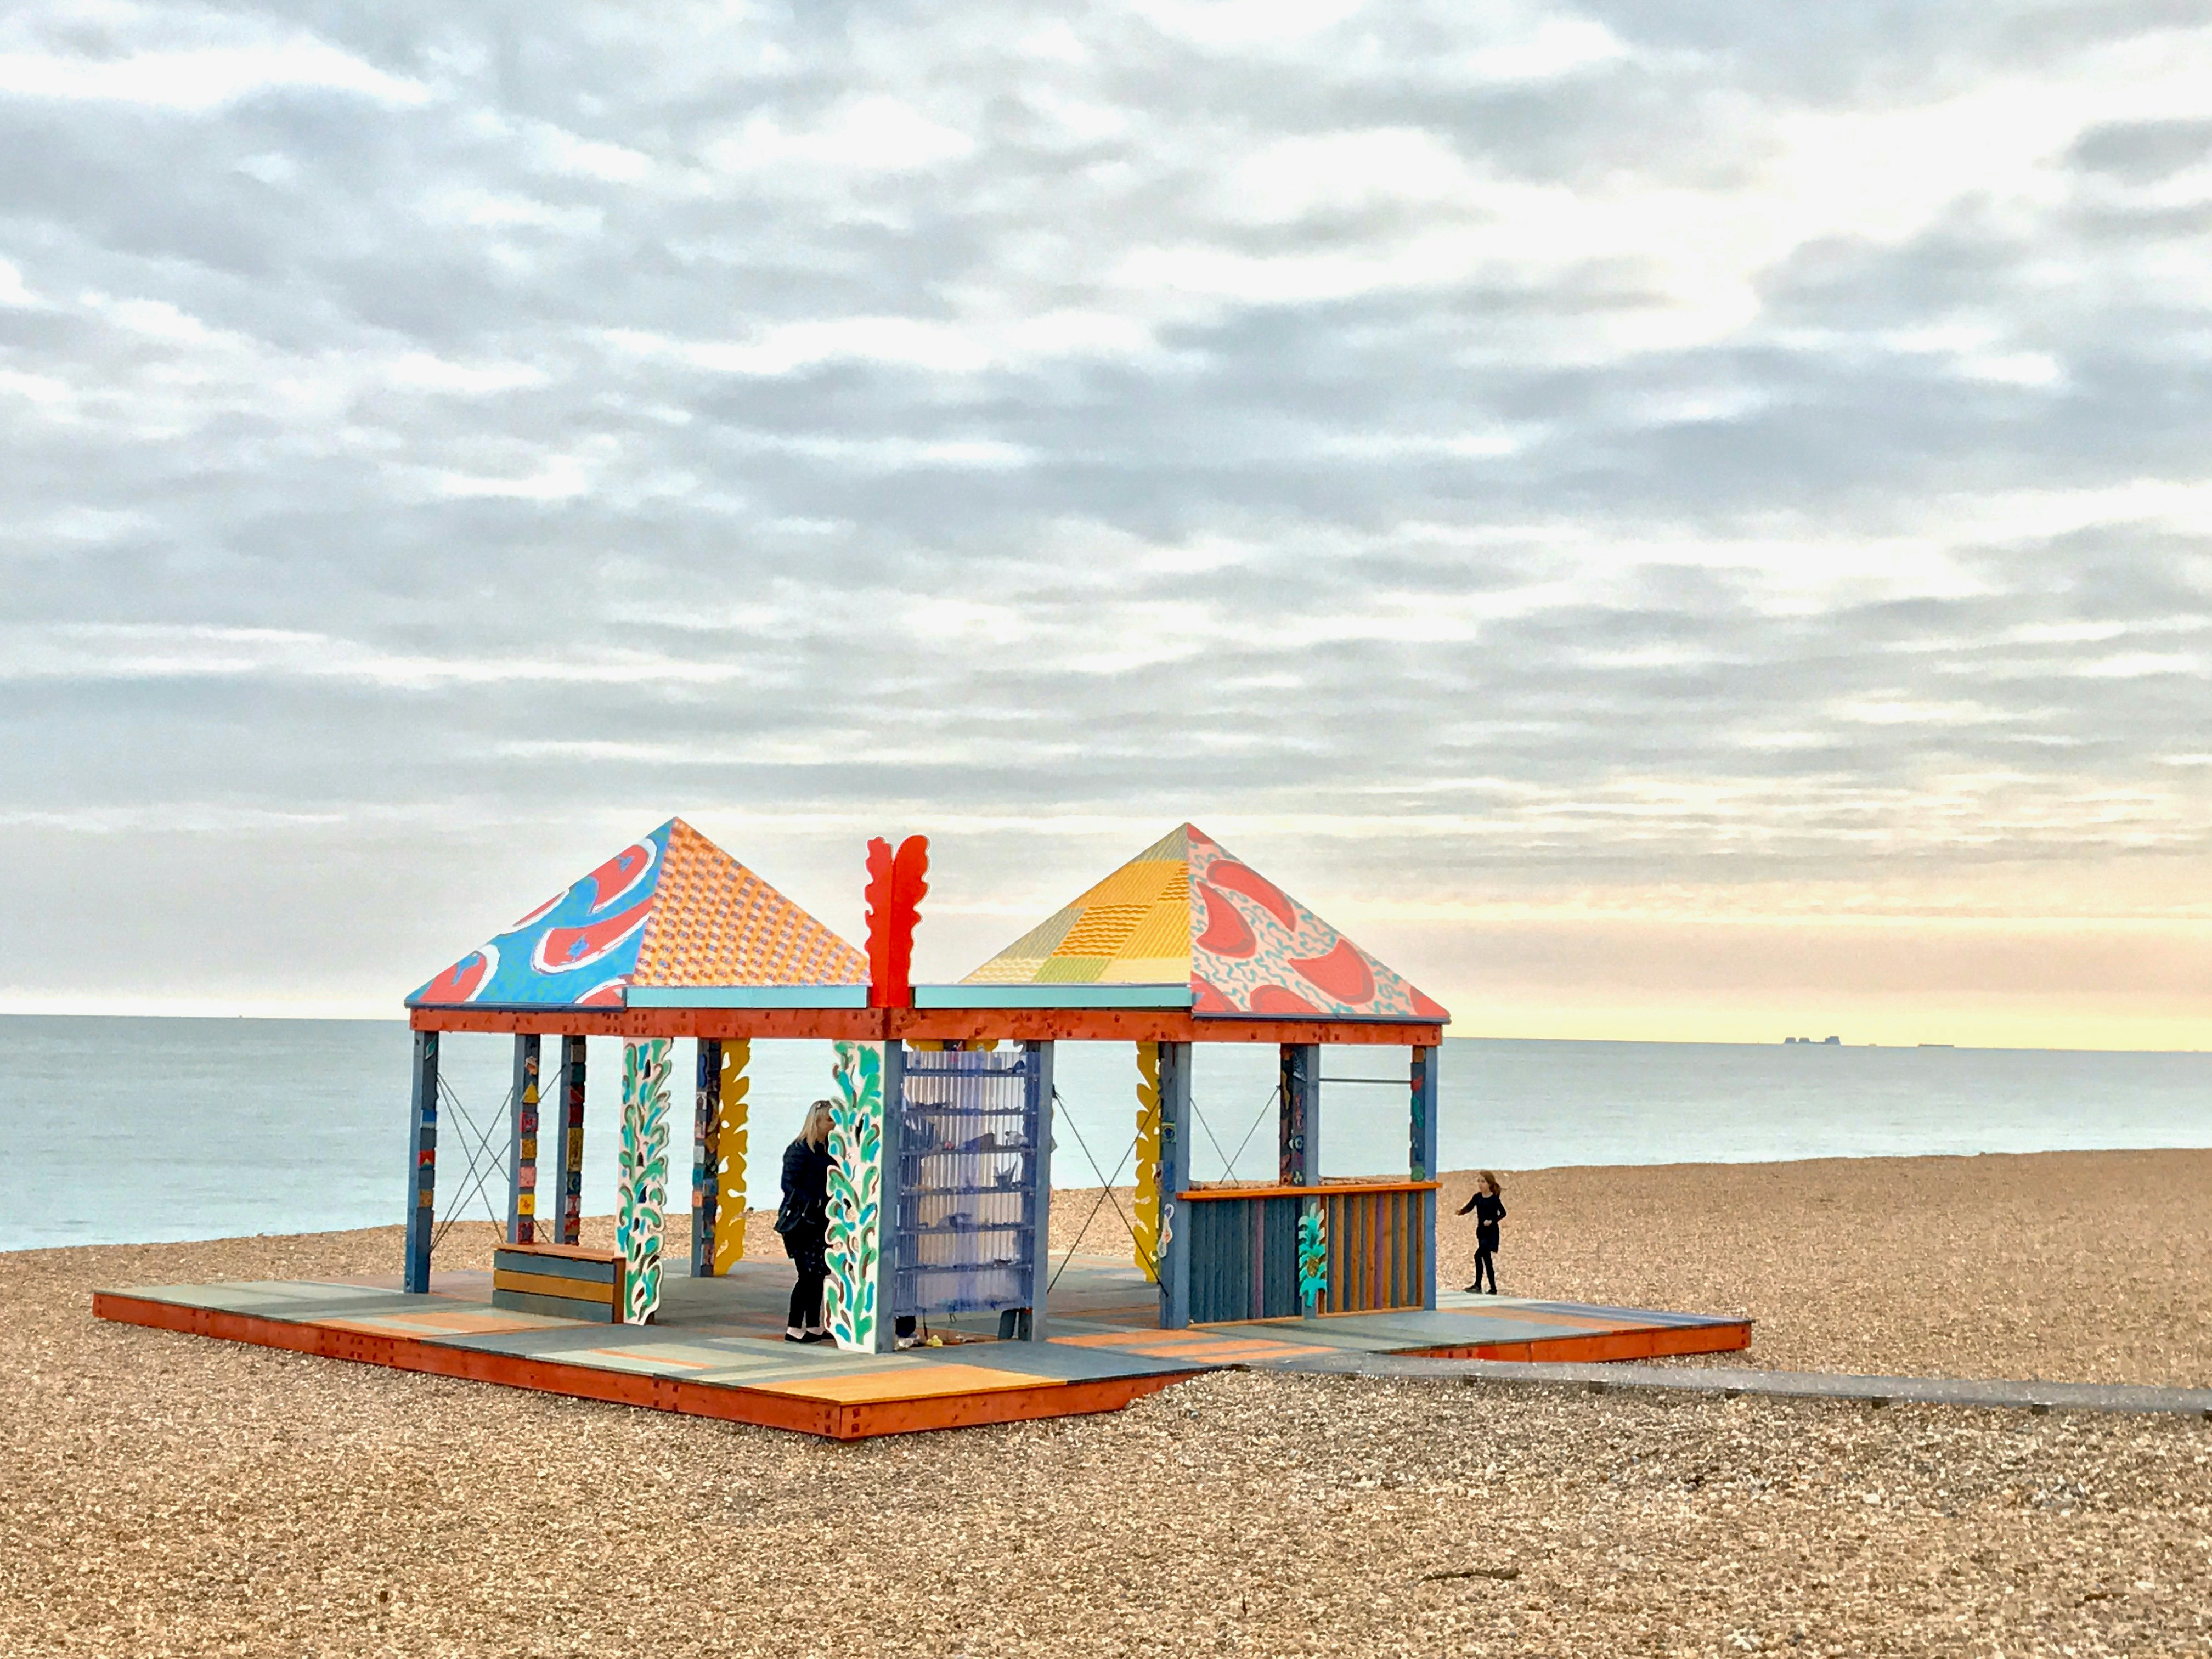 Two brightly painted pagodas, and artwork by Sol Calero for the 2017 Folkestone Triennial, stand on a platform on Folkestone's pebbled beach.